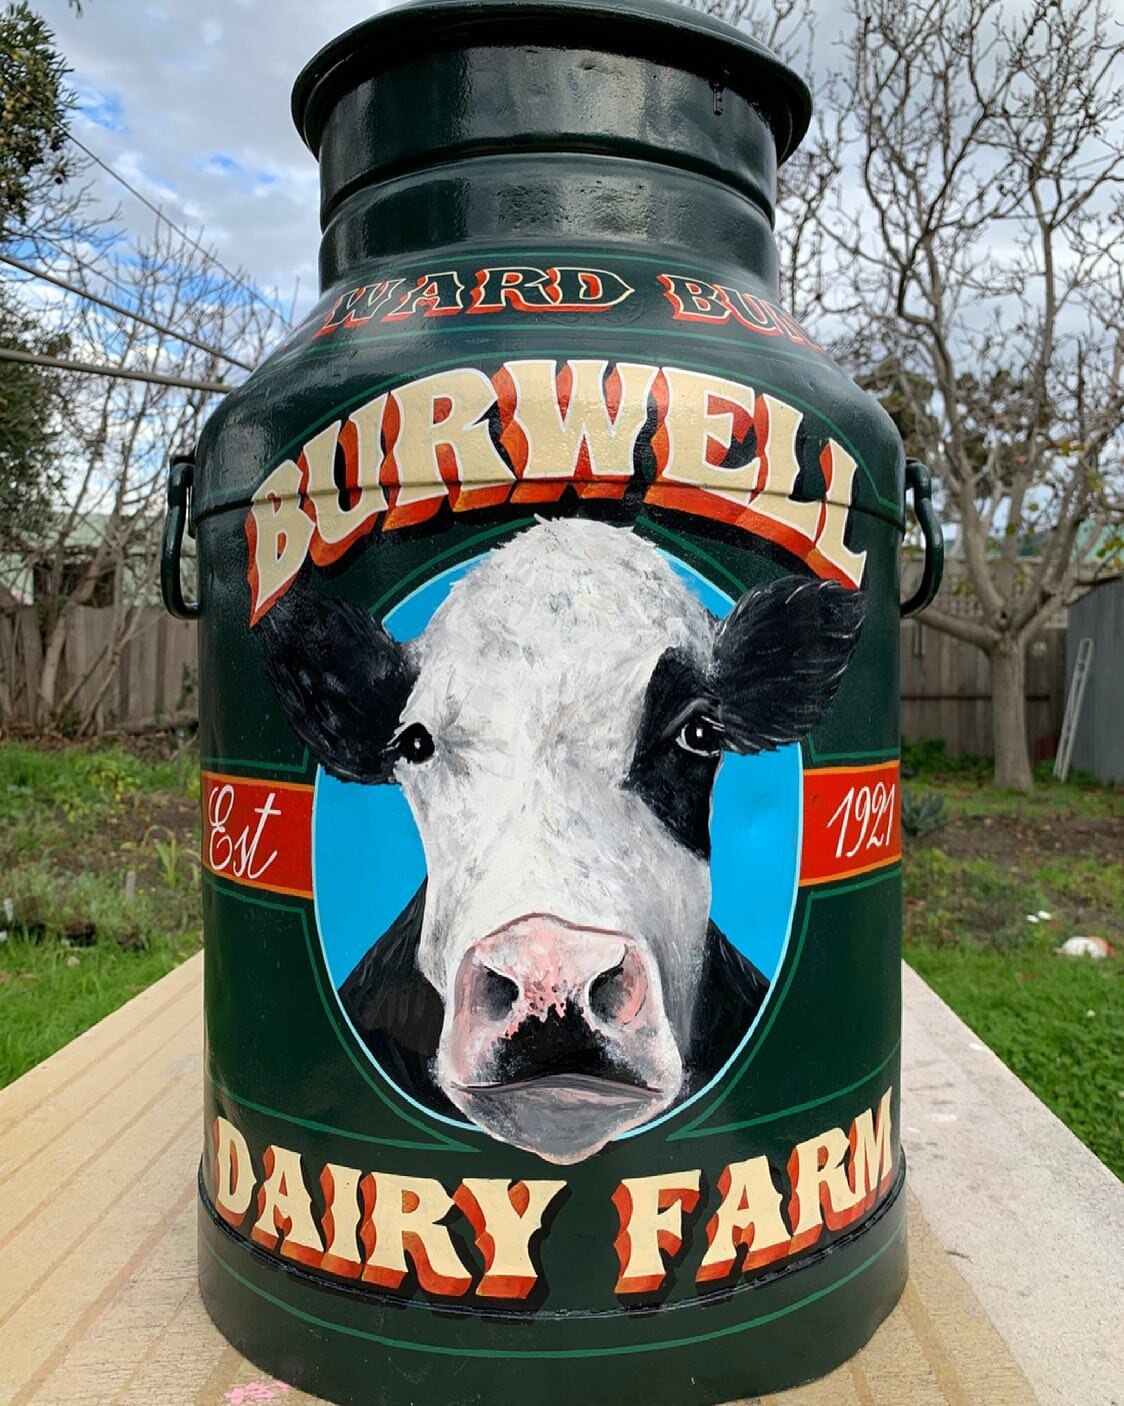 Hand painted vintage milk can for Max.
Lots of inspiration from @aknightofthebrush Rob weaver